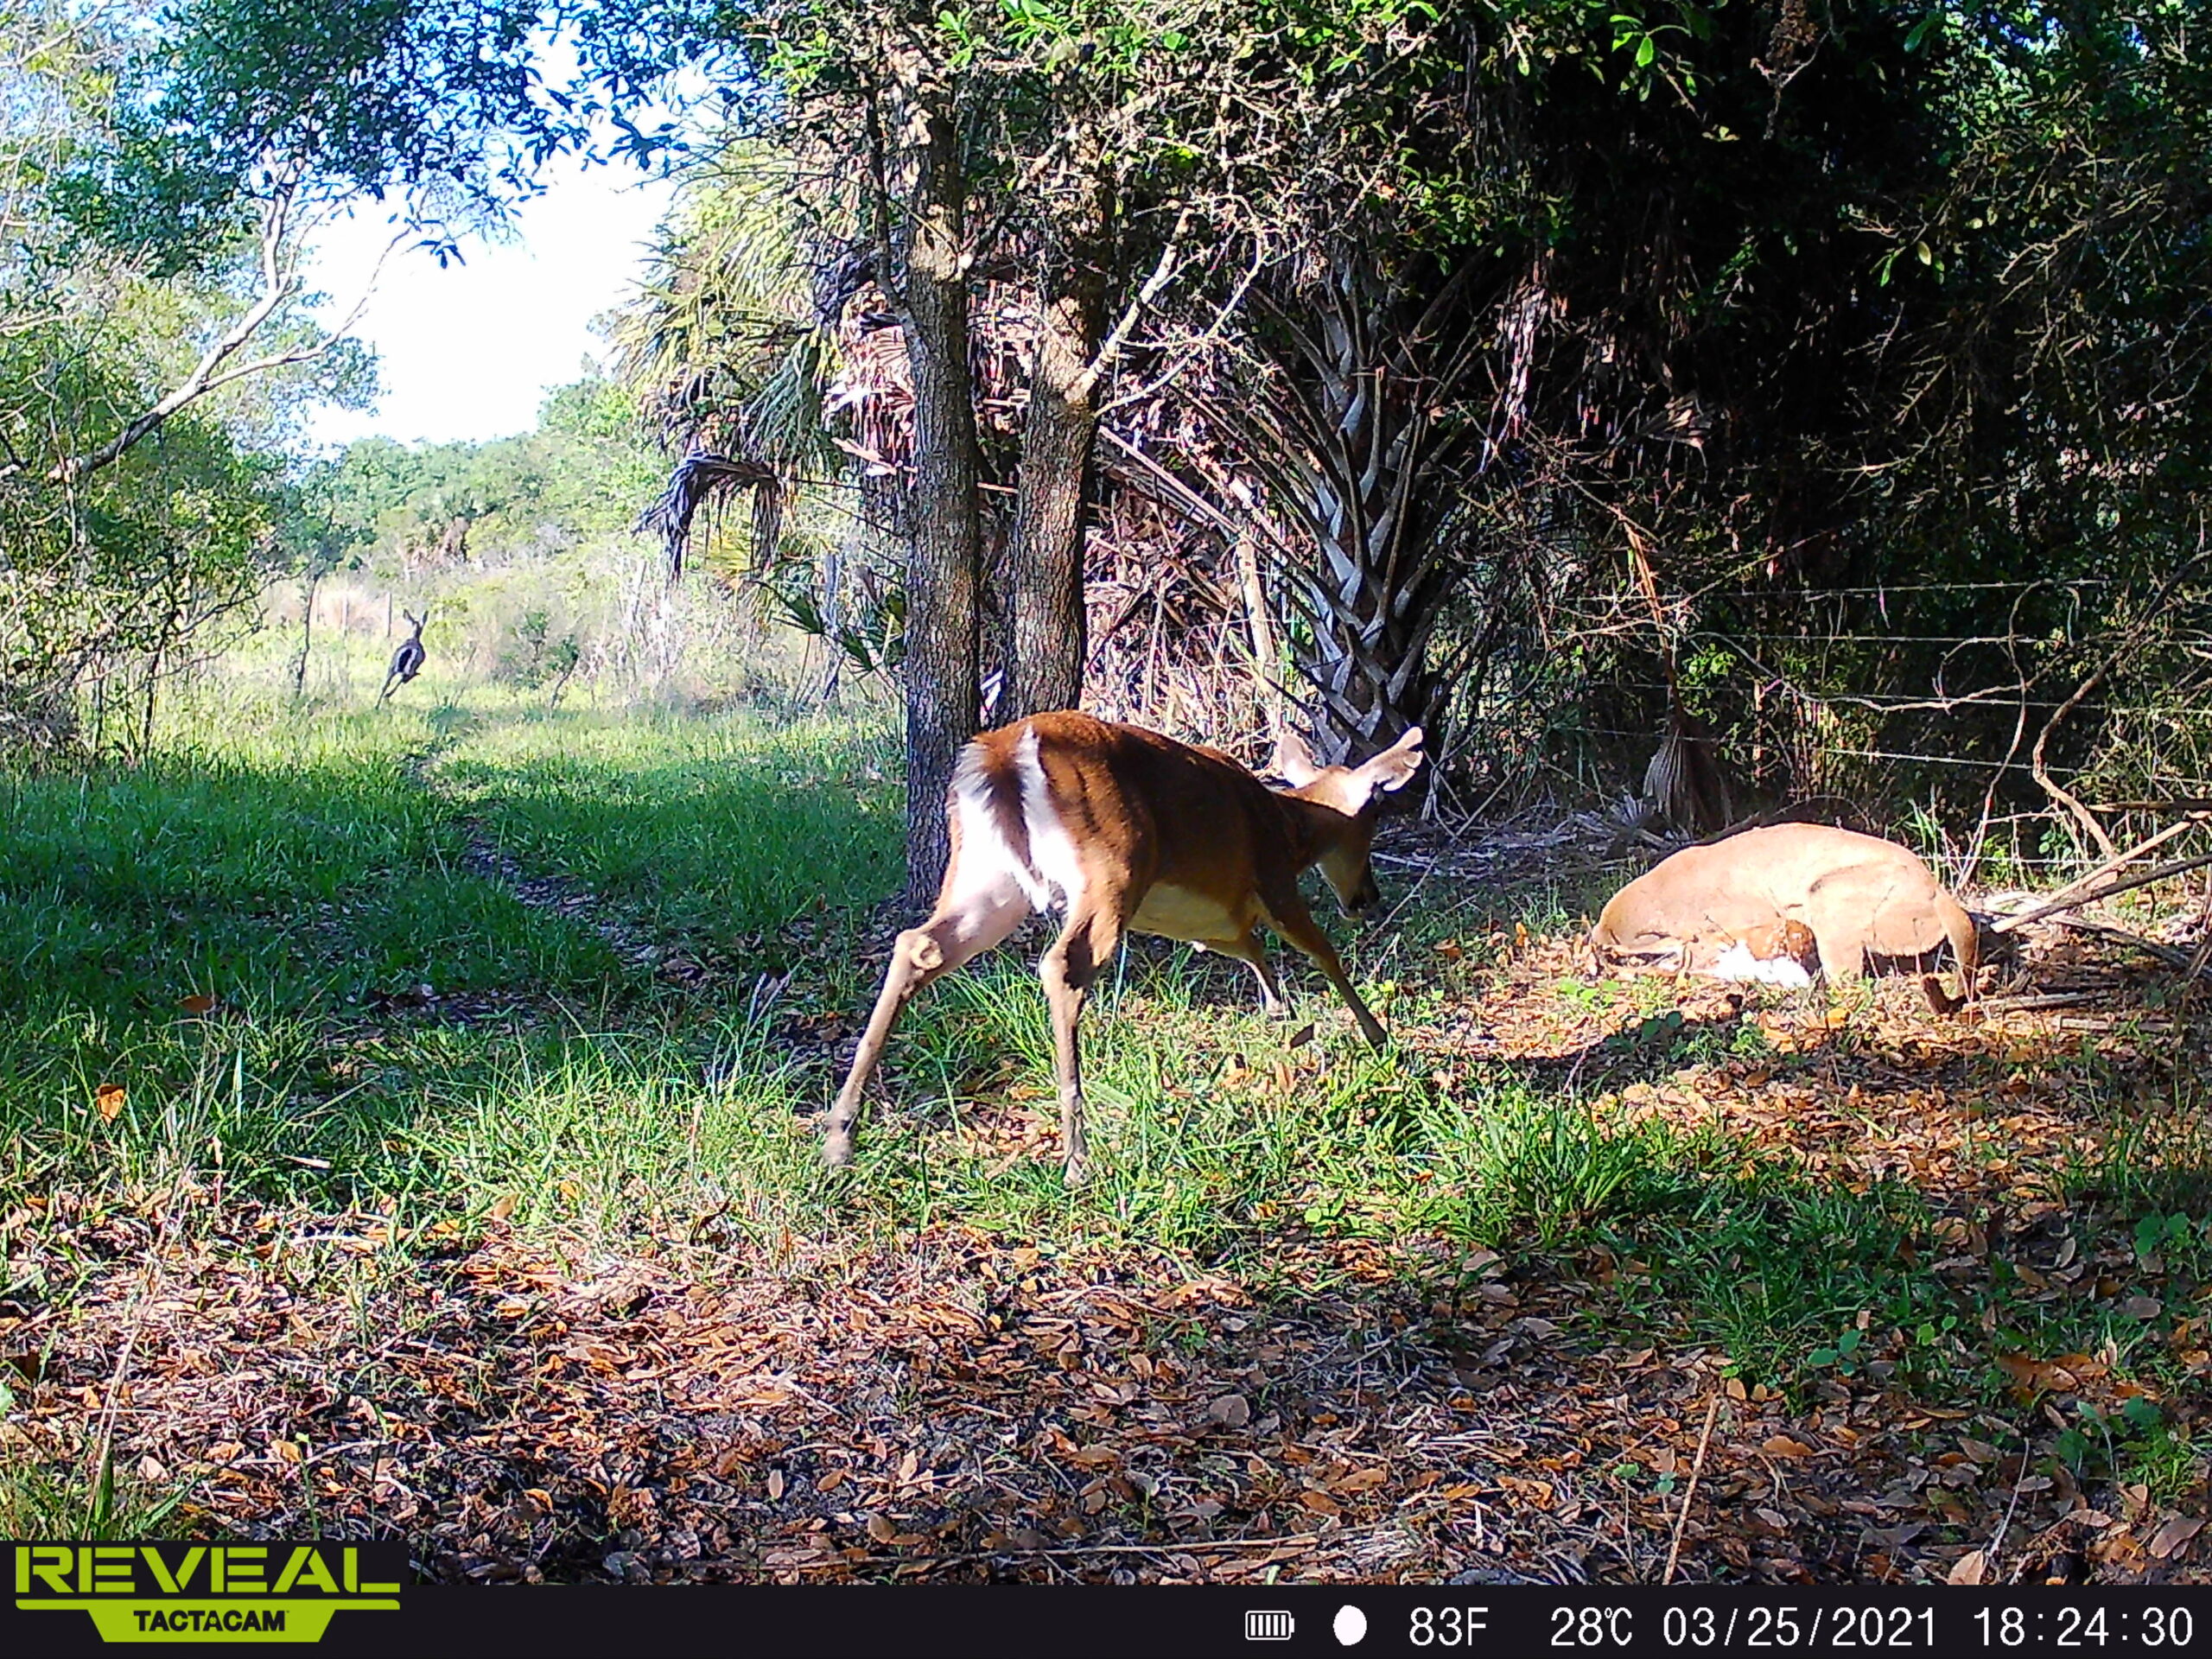 A Florida panther overpowers a fawn on a sprawling farm west of famed Lake Okeechobee.